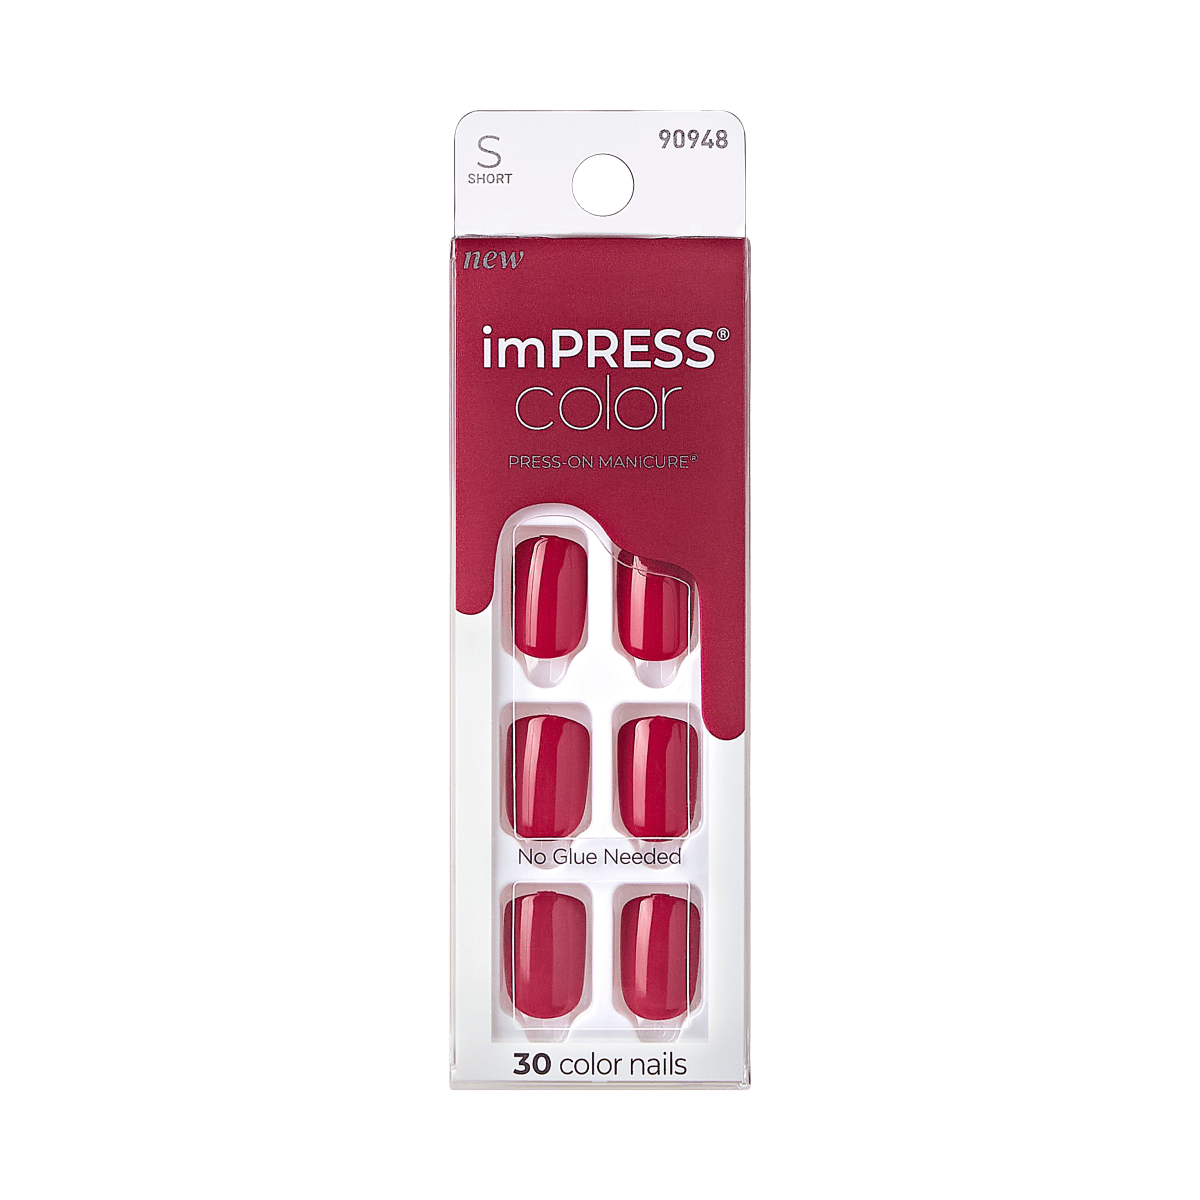 imPRESS Color Press-On Nails - Dried Roses